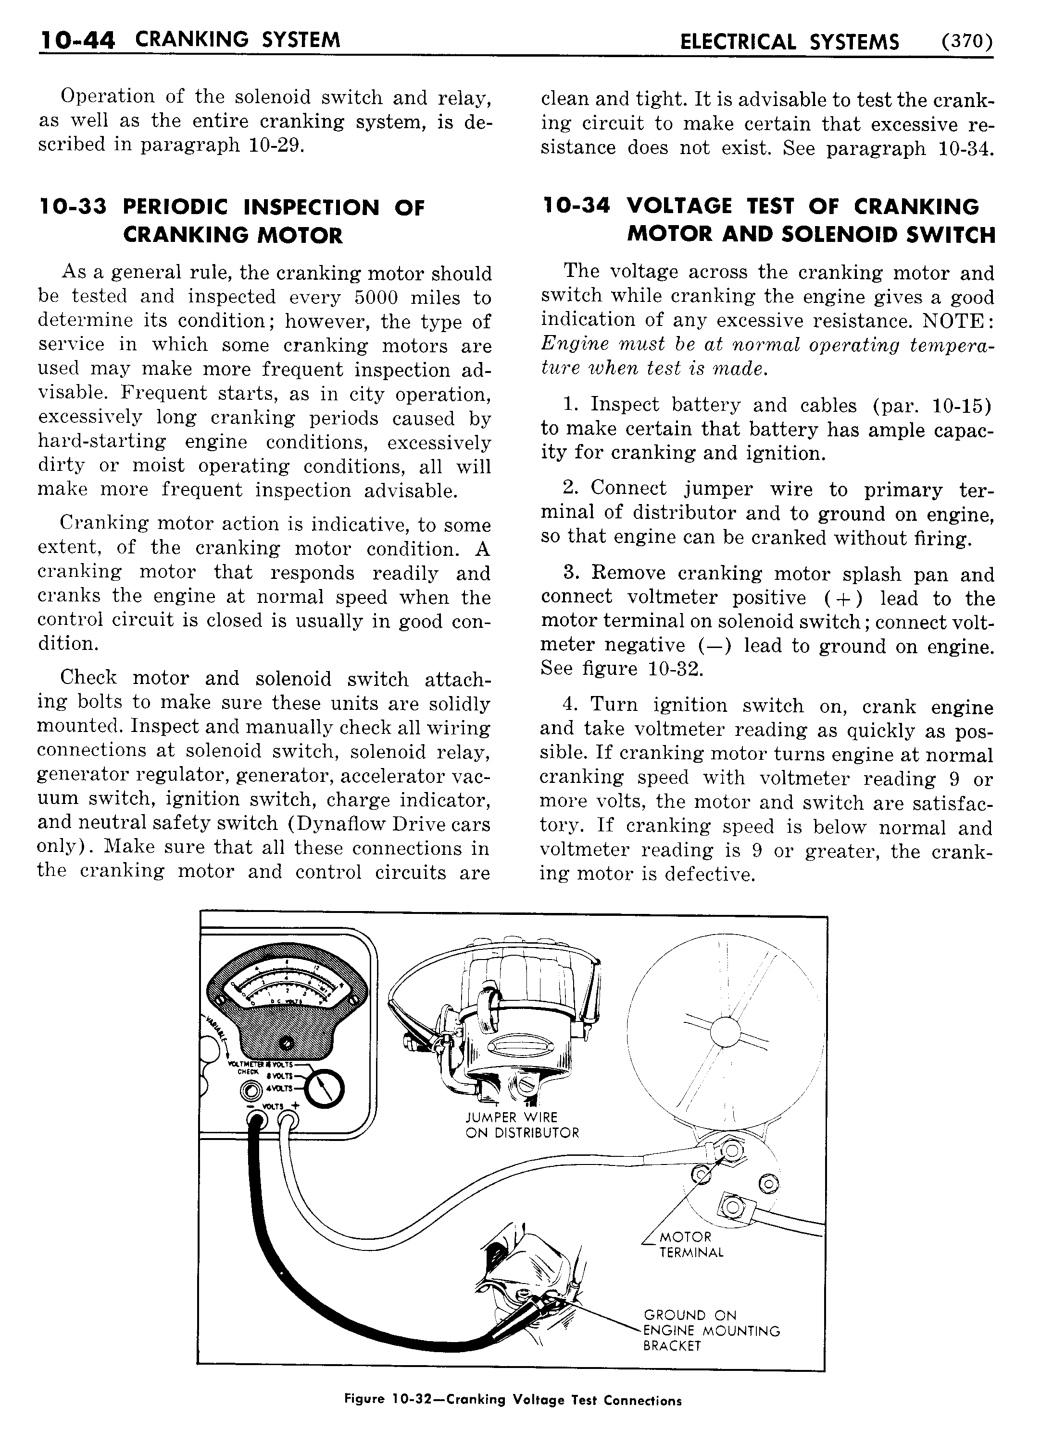 n_11 1956 Buick Shop Manual - Electrical Systems-044-044.jpg